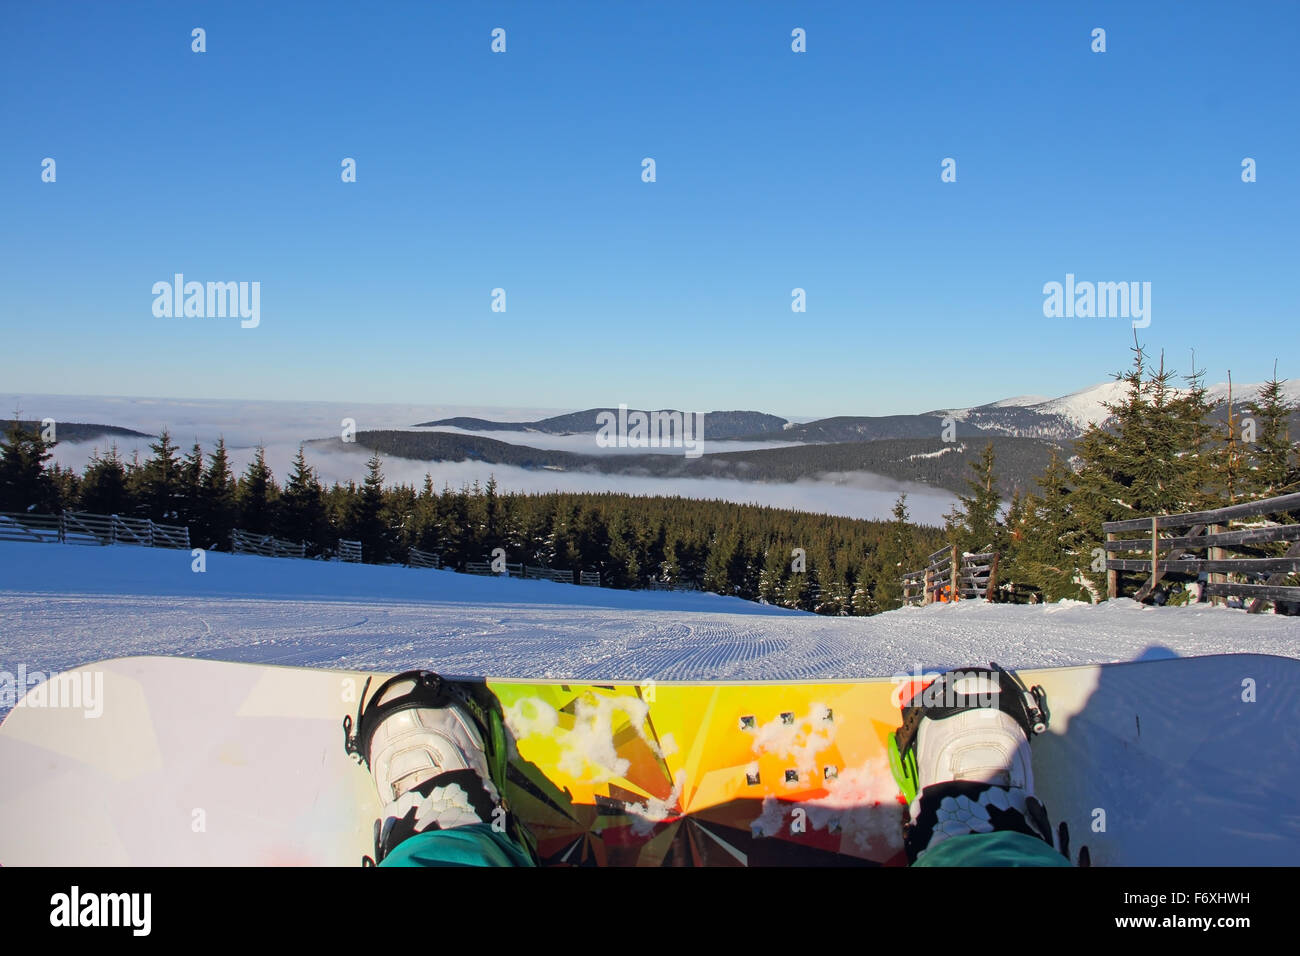 Legs and snowboard od snowboarder sitting on snow with mountains on background Stock Photo